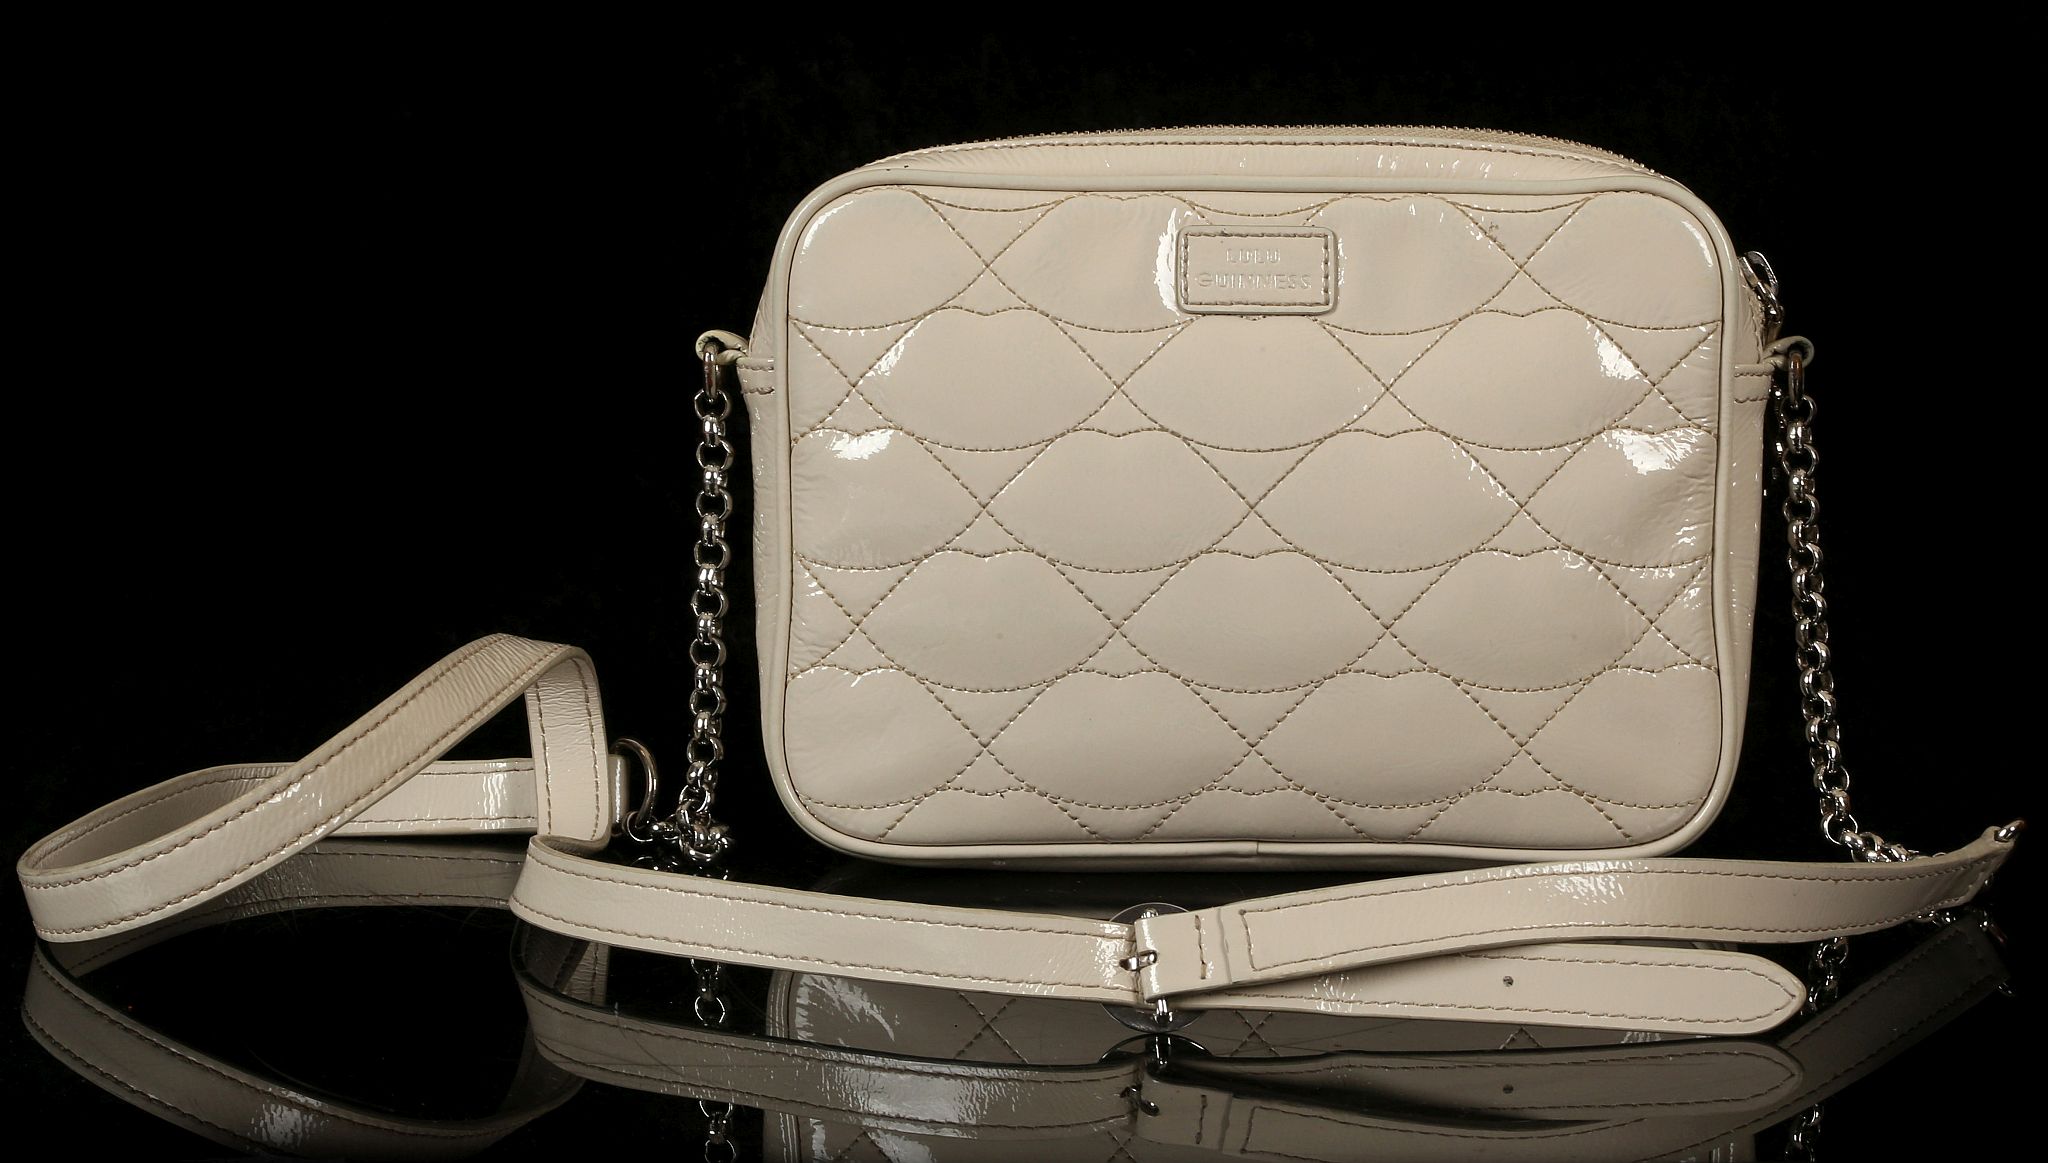 LULU GUINNESS LIPS HANDBAG, beige patent leather with stitched lips pattern, silver tone hardware,